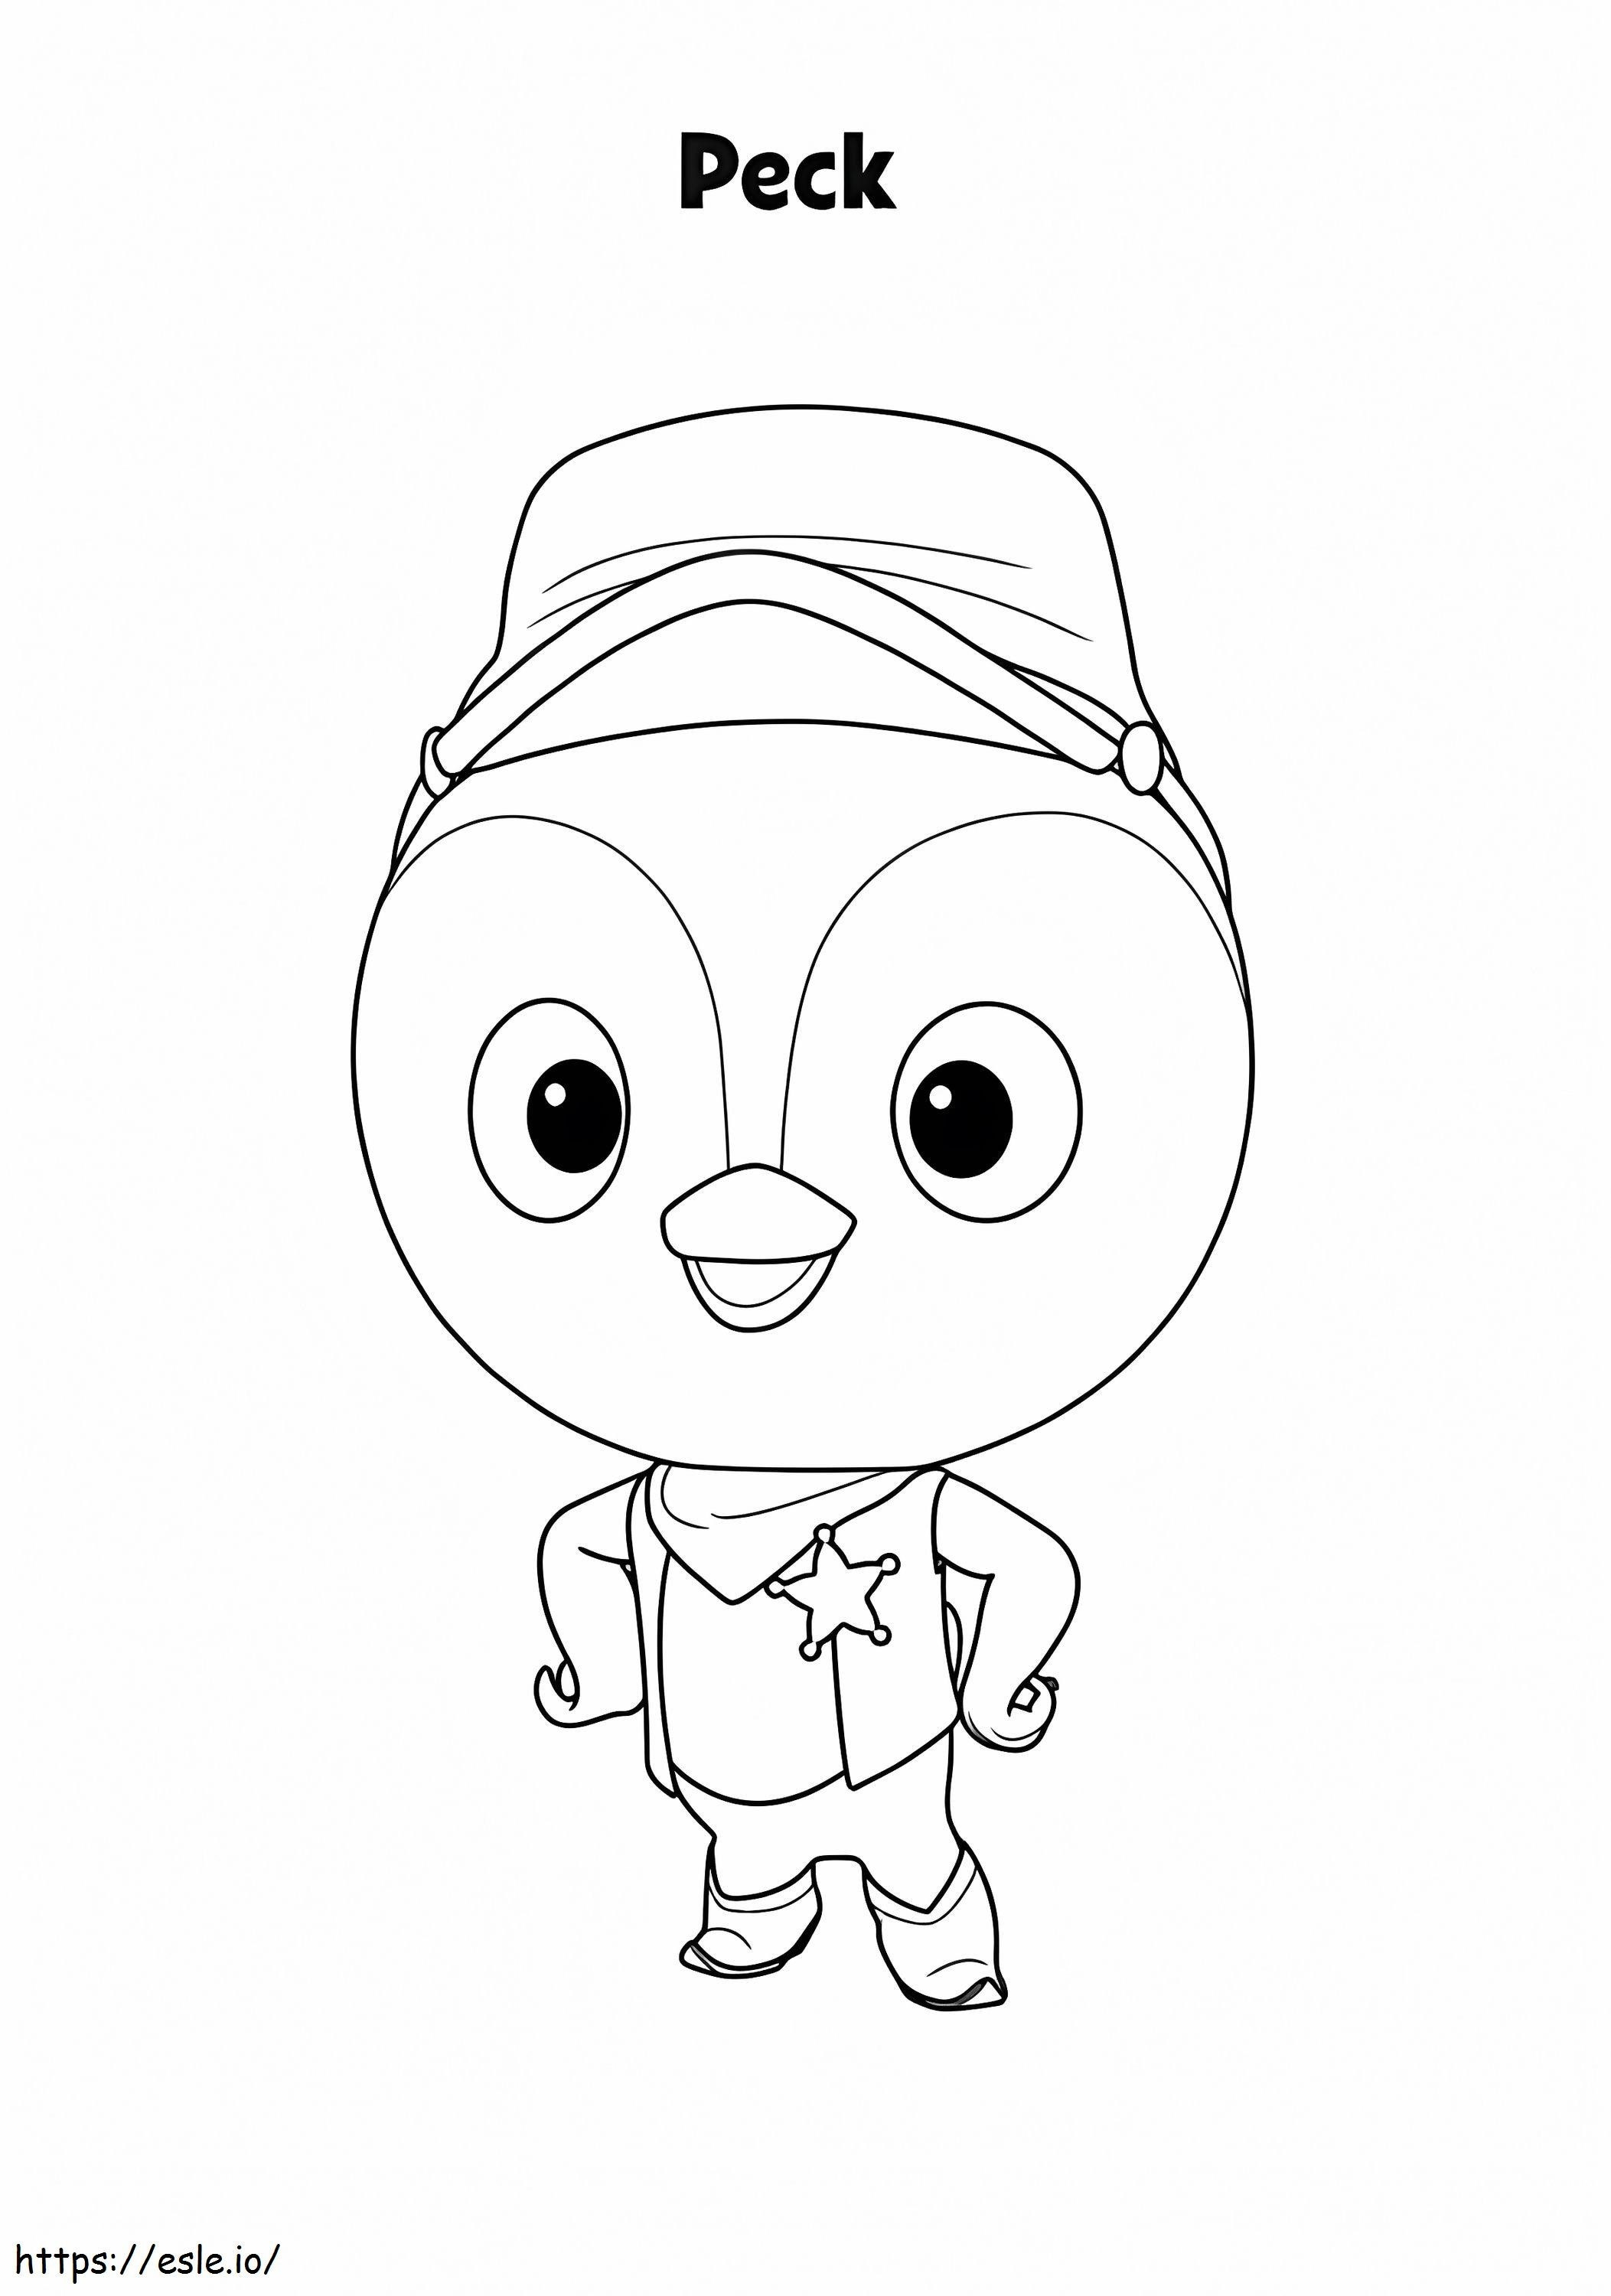 Peck From Sheriff Callie coloring page